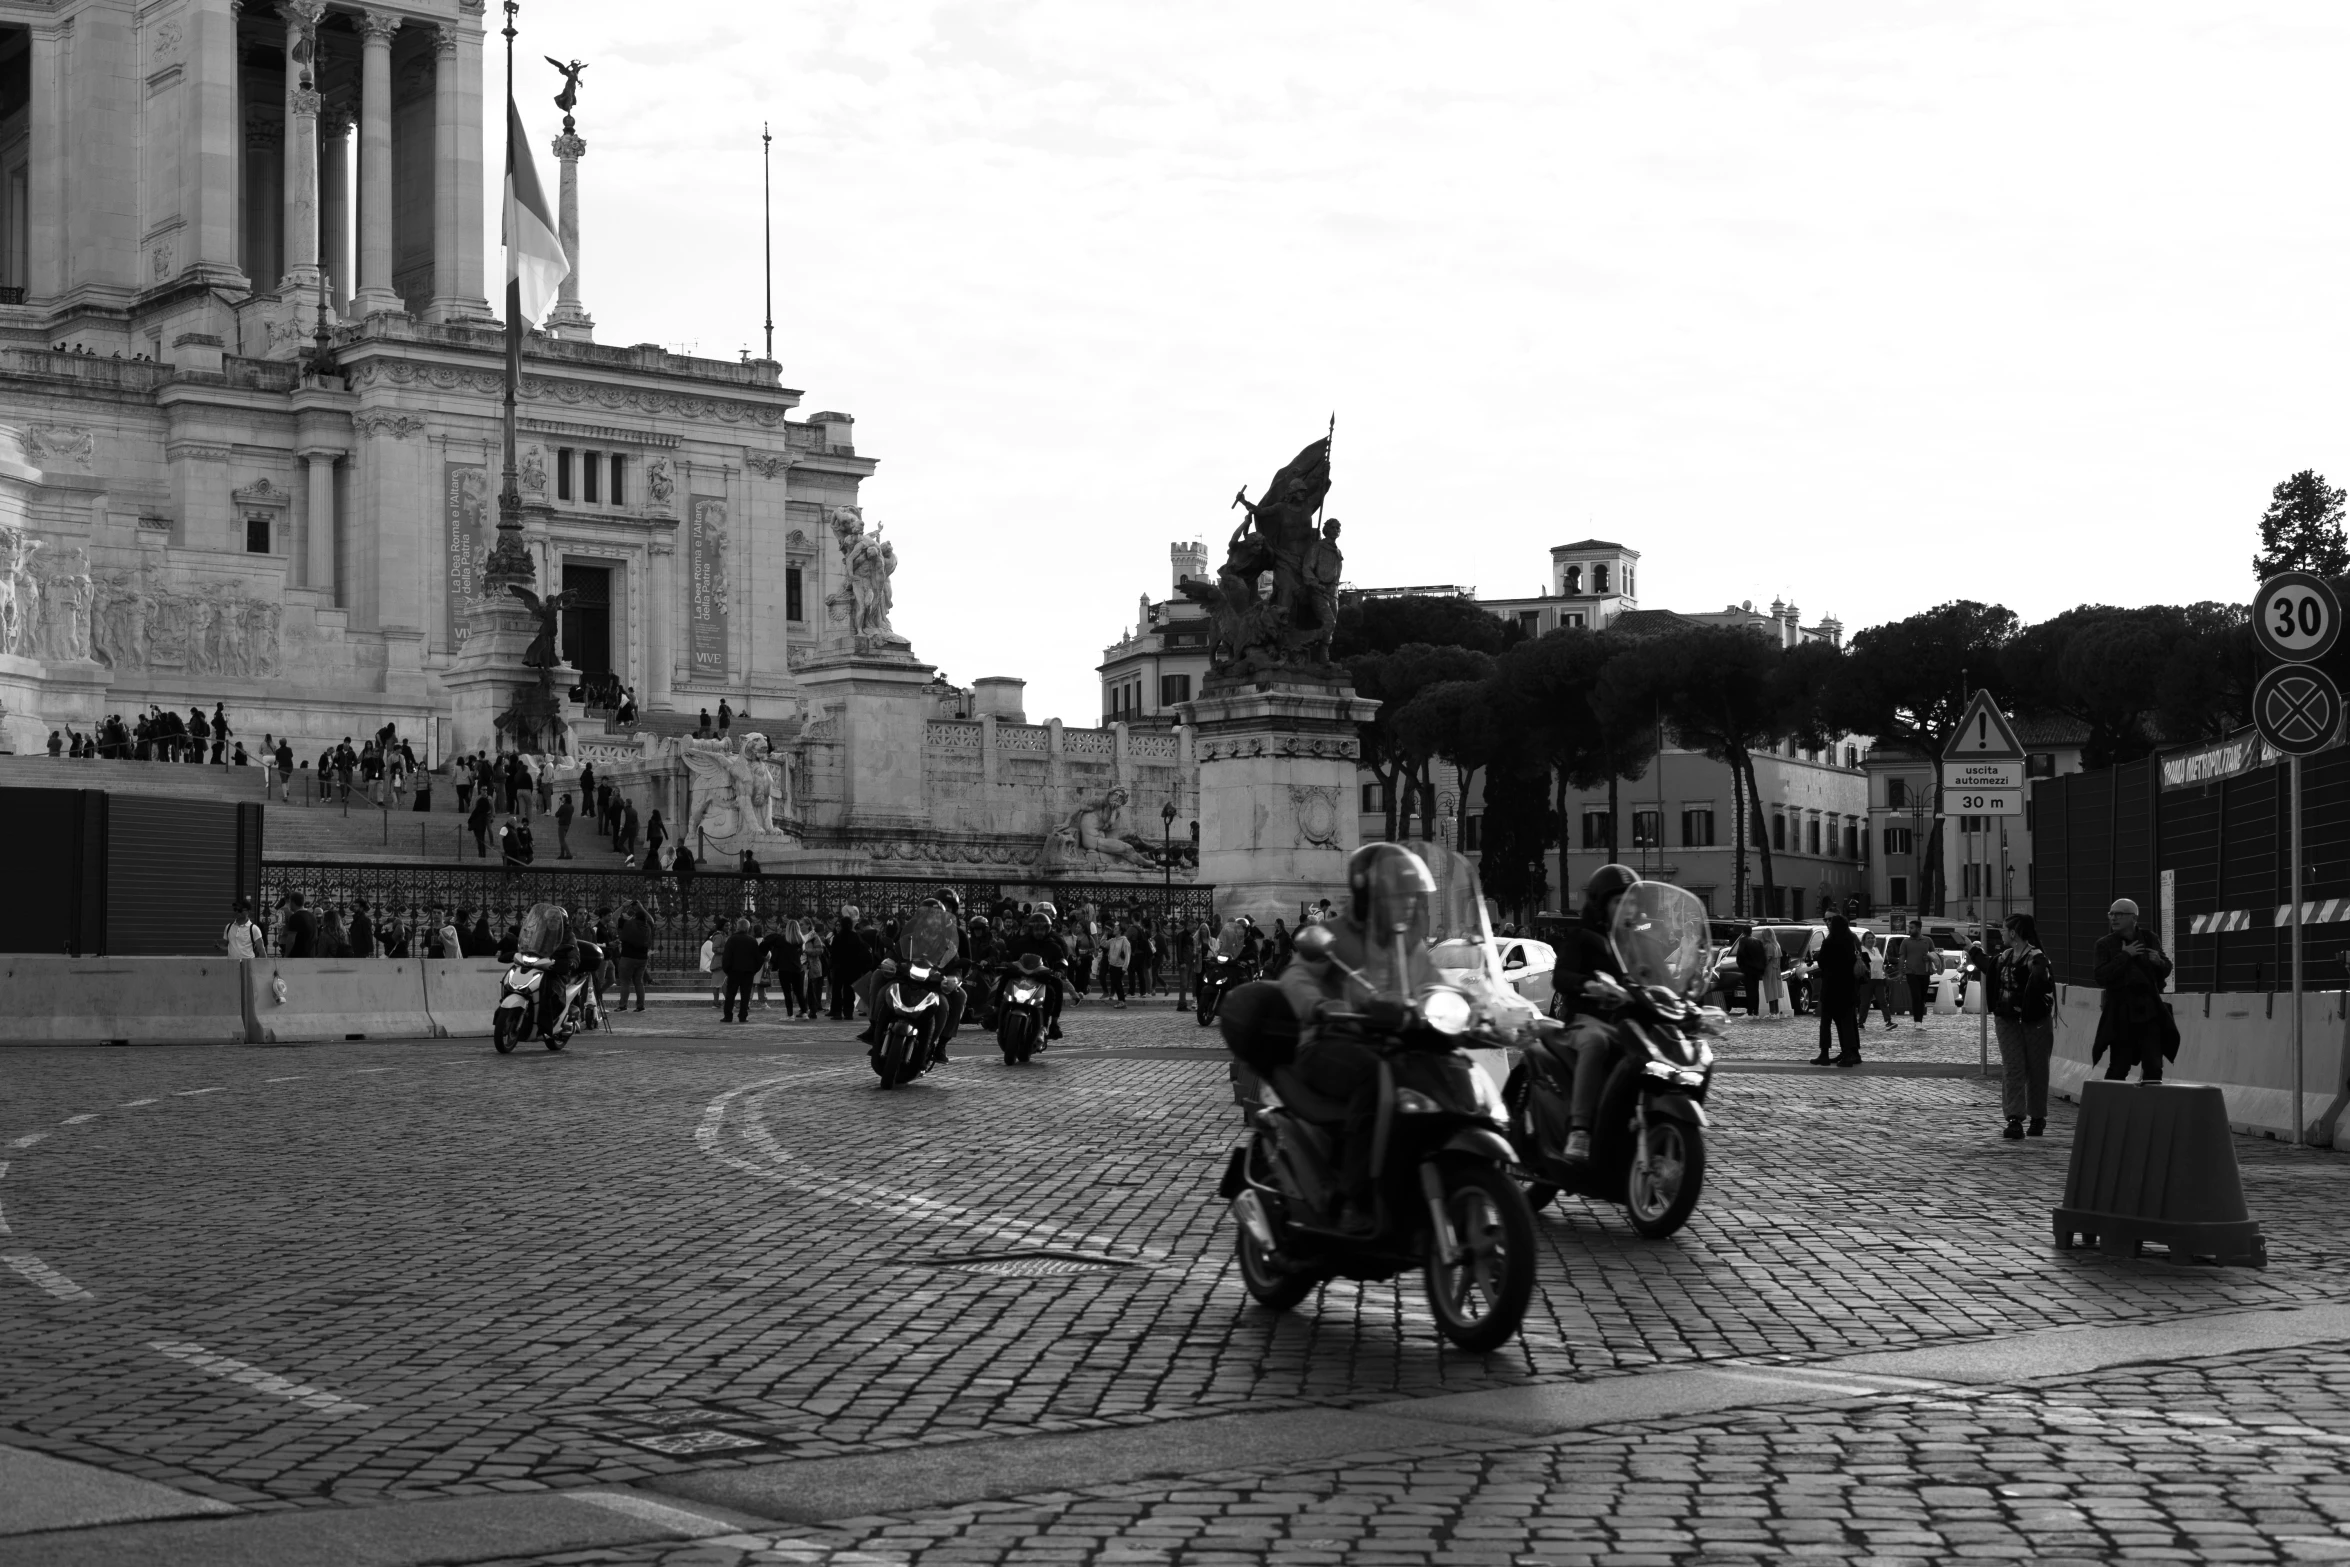 some people are on motorcycles and in black and white